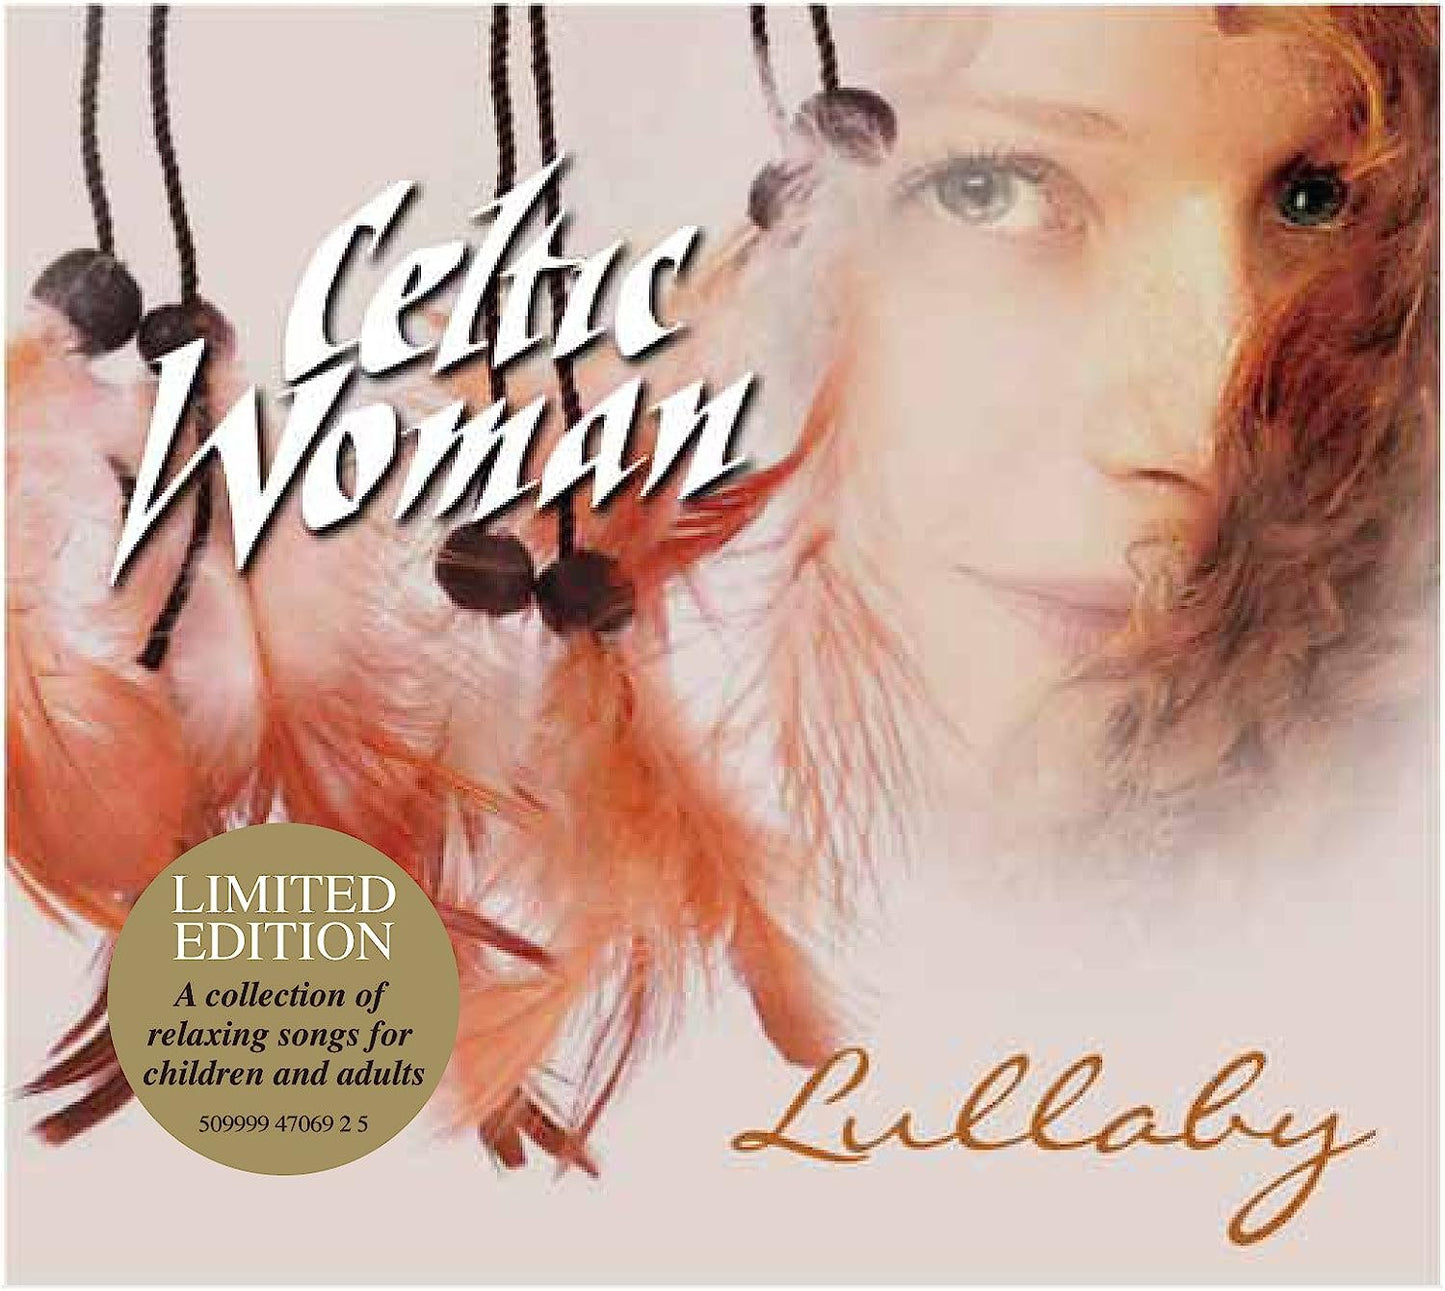 Celtic Woman - Lullaby - USED CD